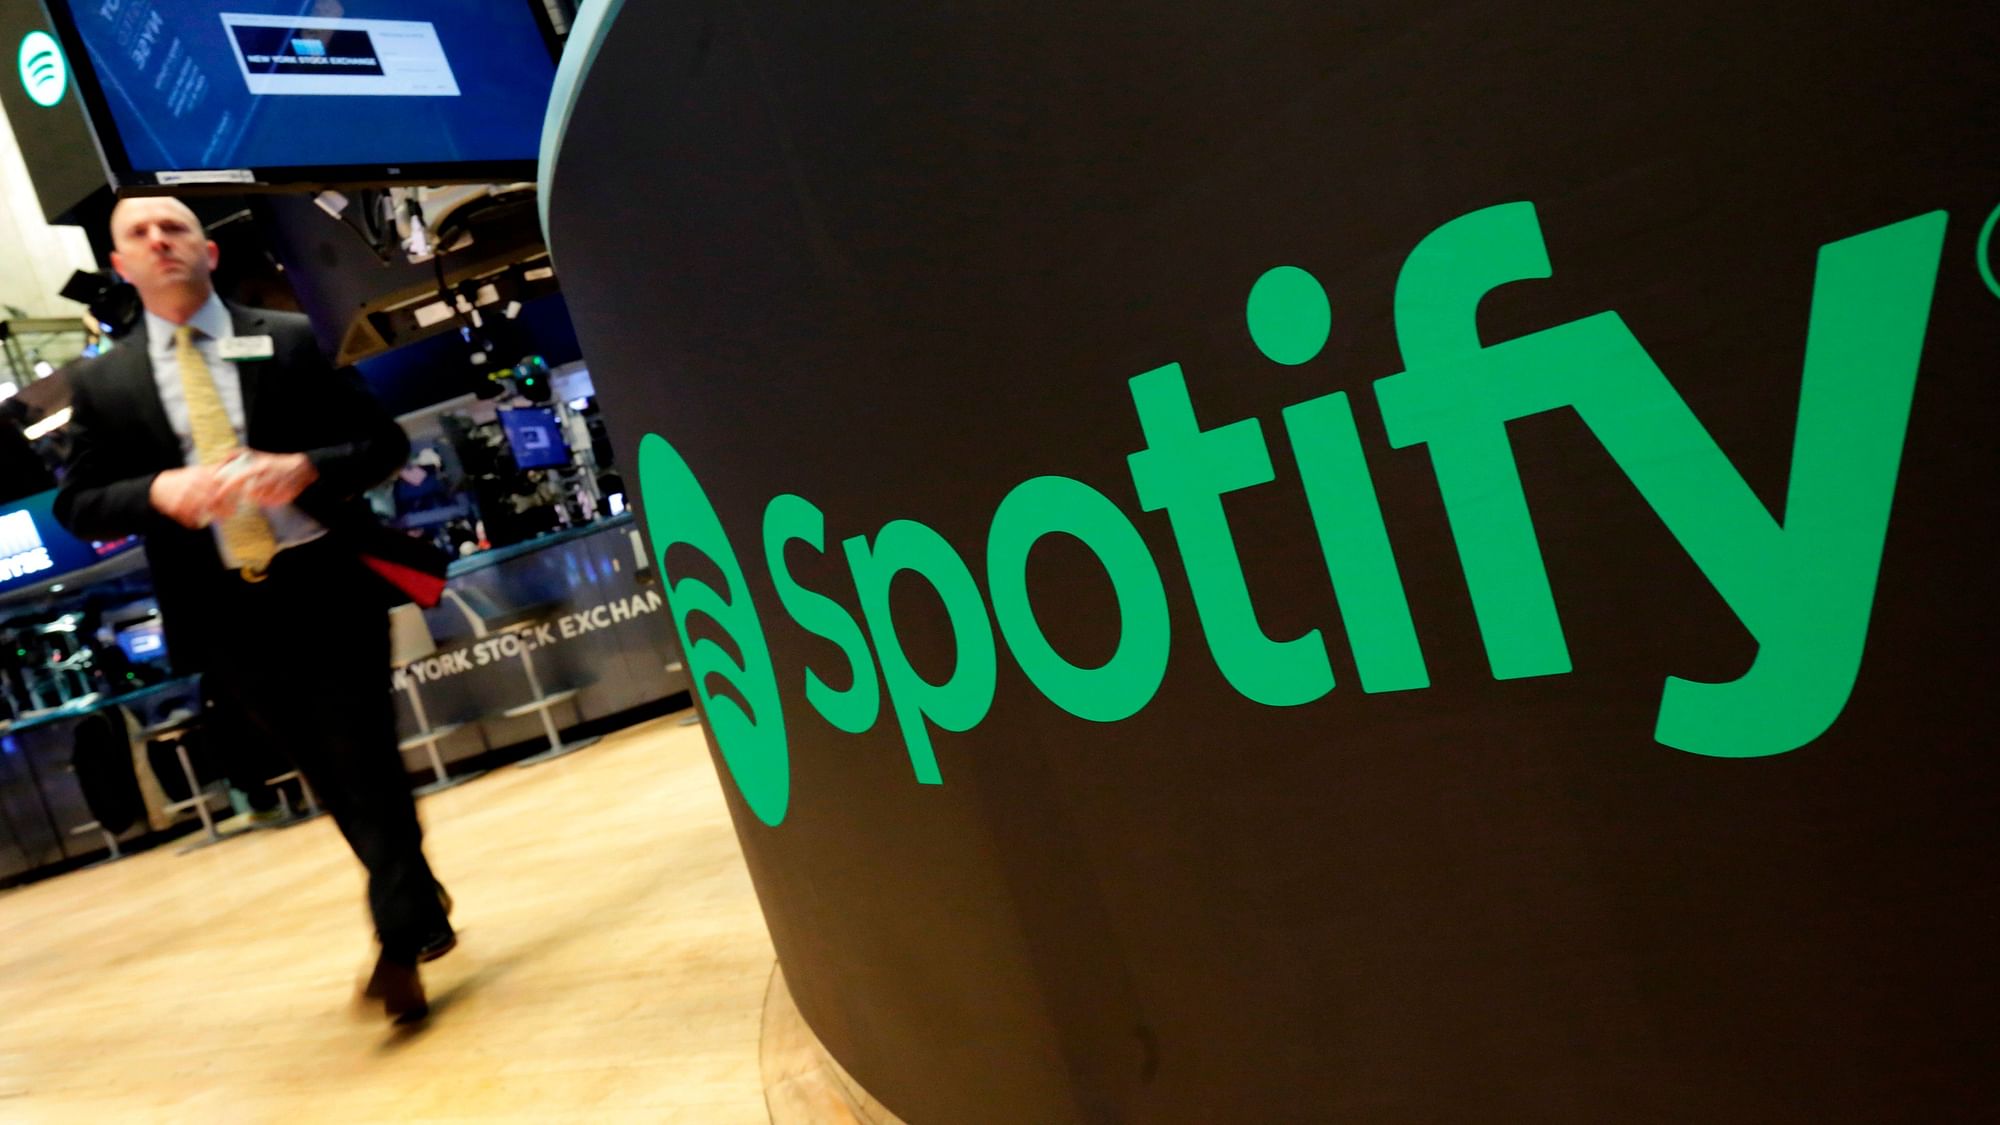 Music streaming service Spotify says the number of its paying subscribers has hit 100 million for the first time.